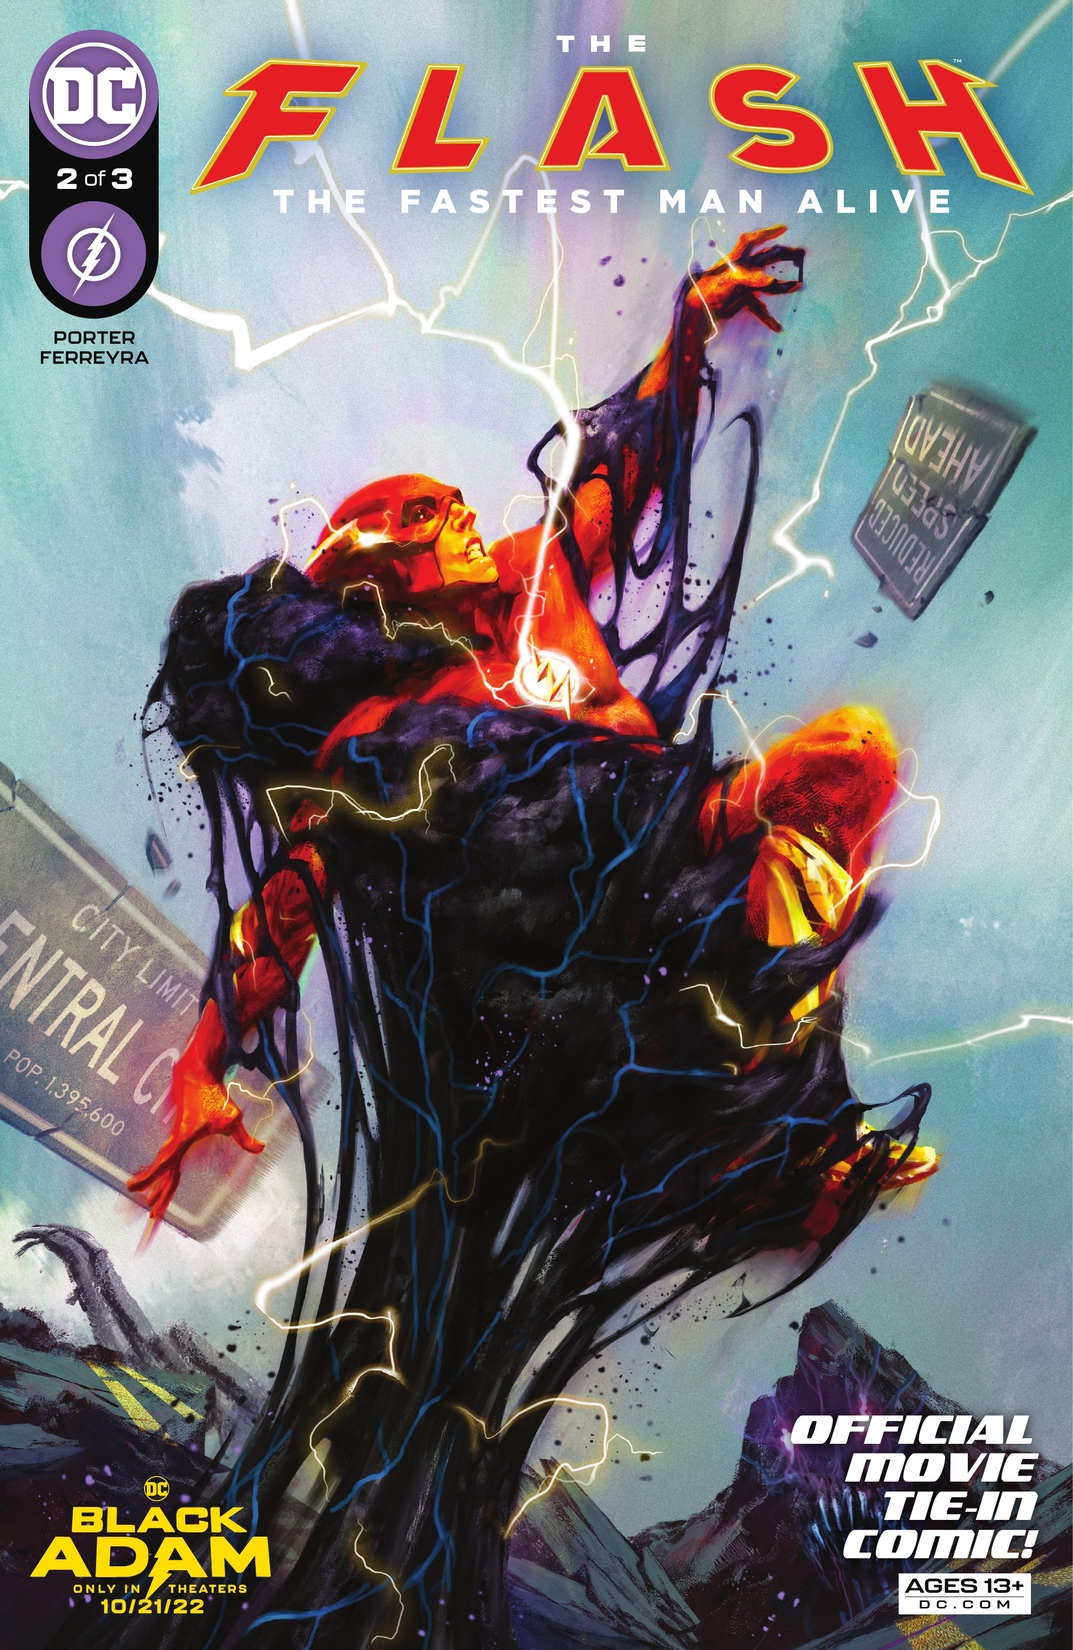 The Flash: The Fastest Man Alive #2 preview images